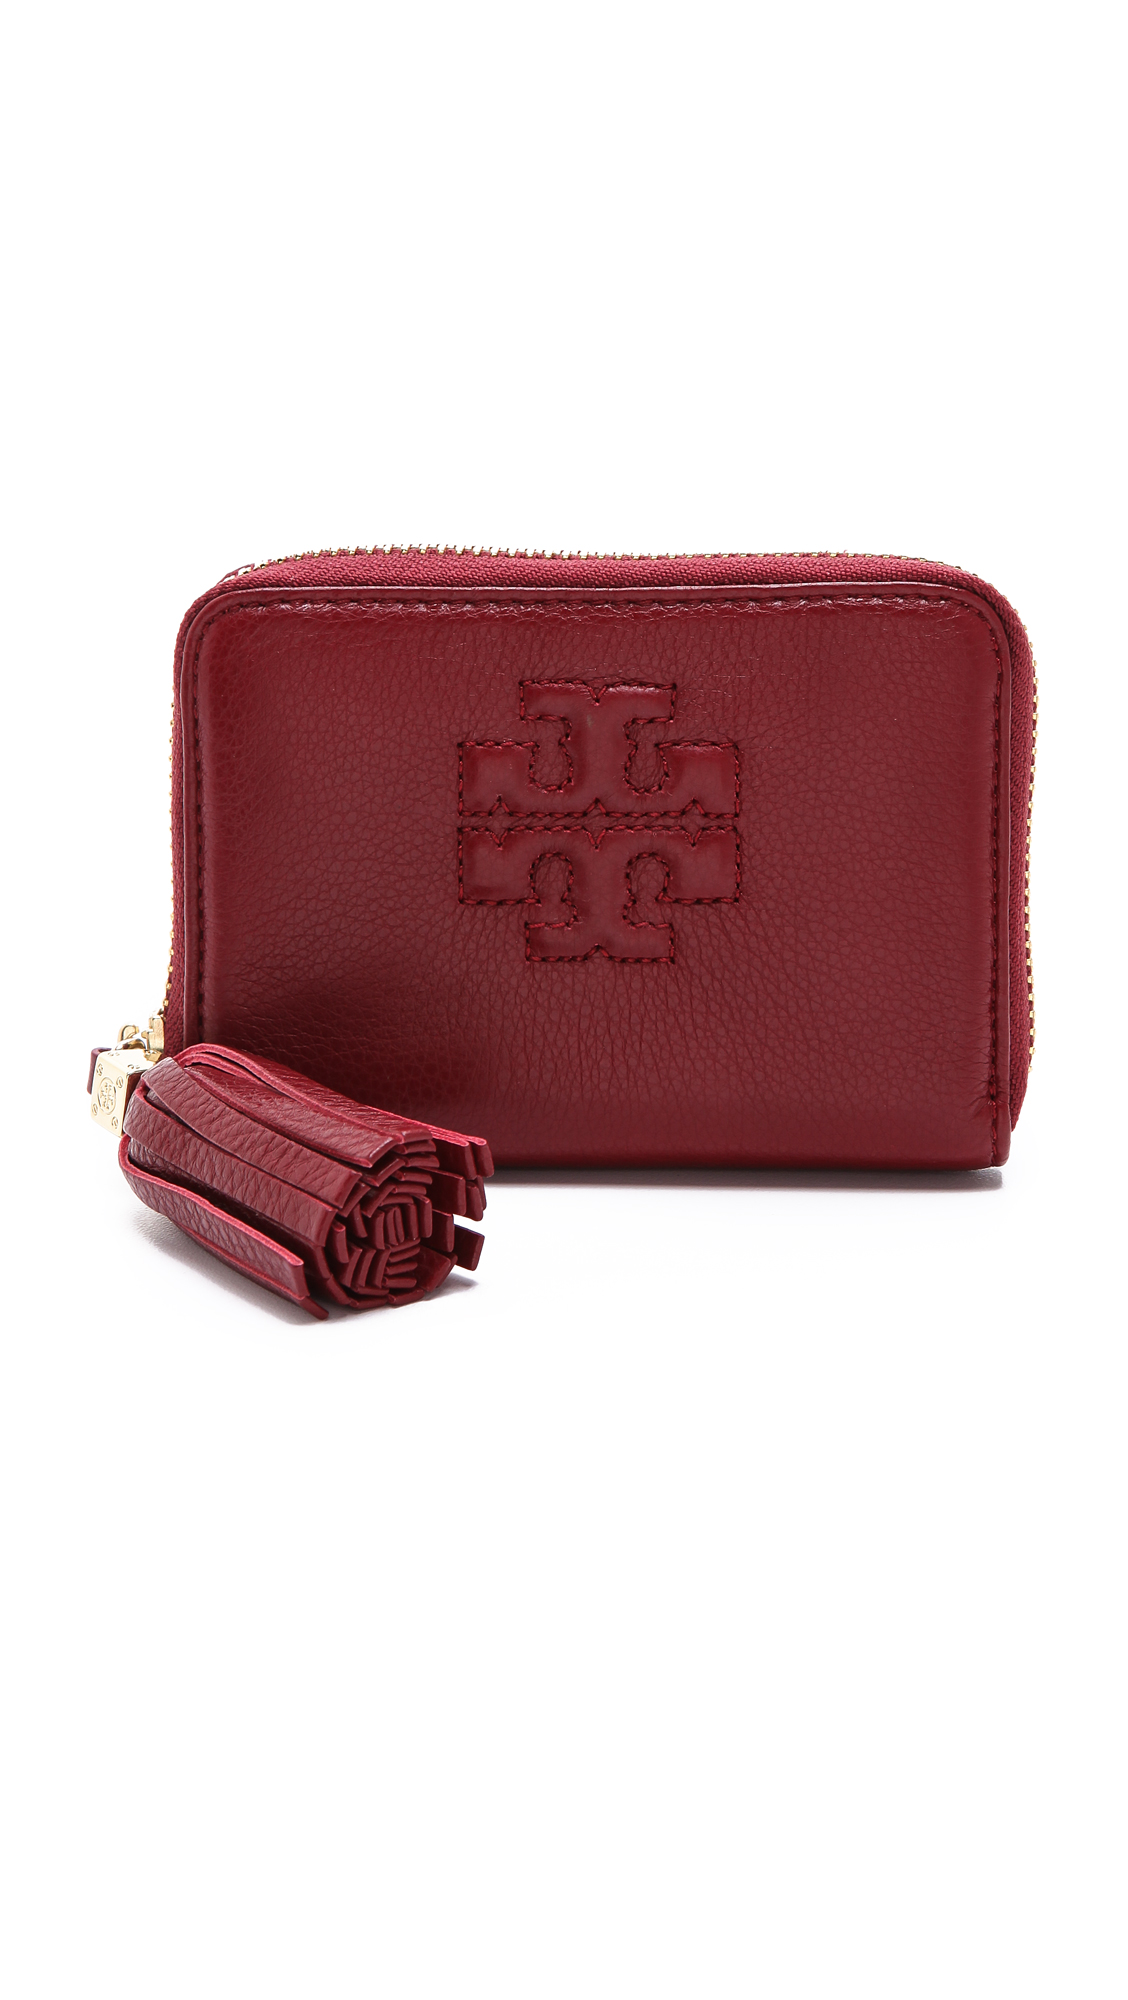 Lyst - Tory Burch Thea Zip Coin Case in Red